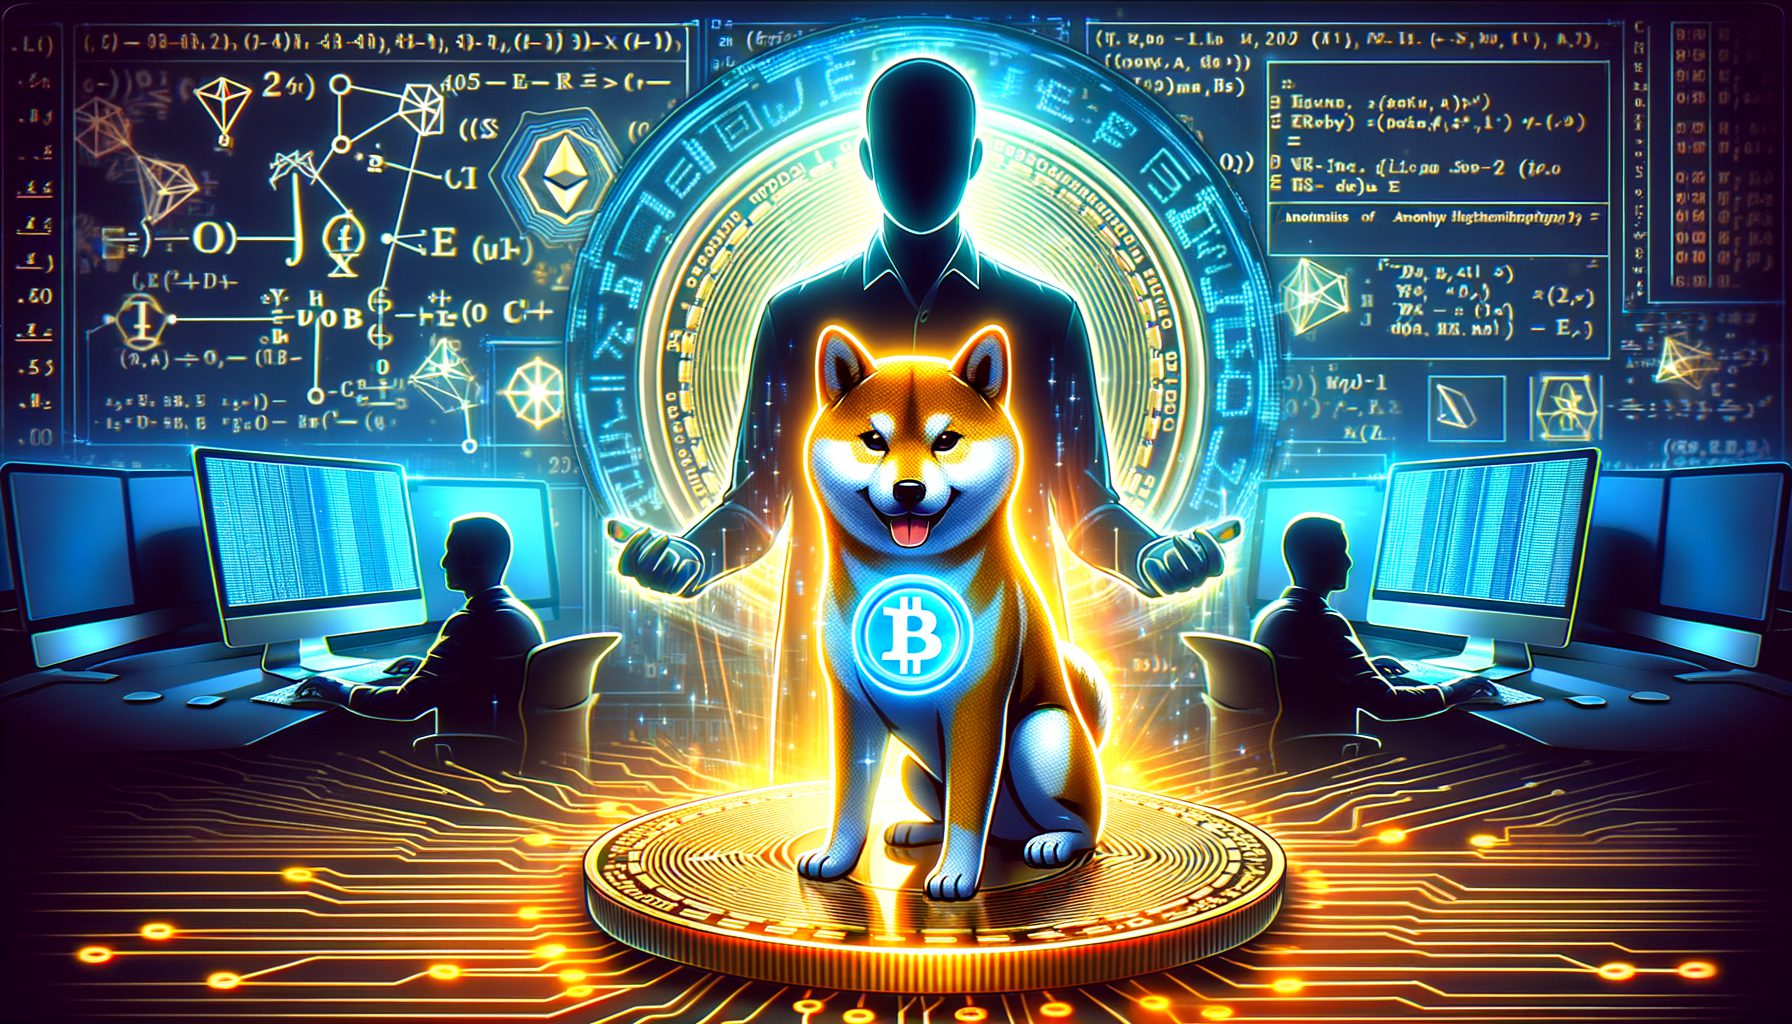 Dogecoin Founder Had Another Crypto Project Before 2014; What Happened to It?